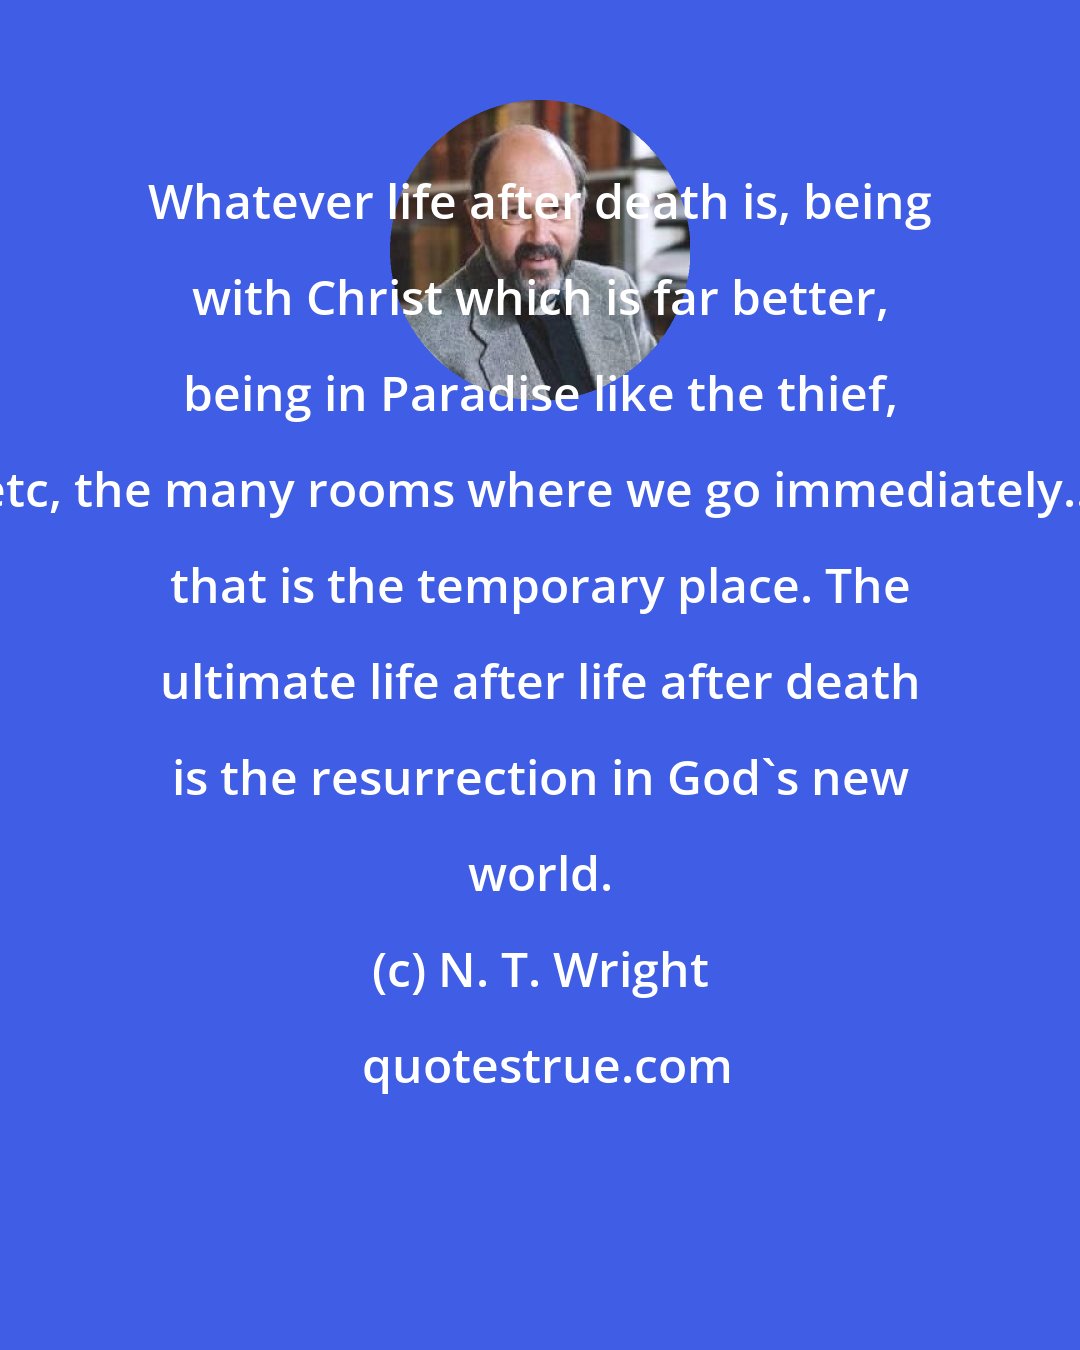 N. T. Wright: Whatever life after death is, being with Christ which is far better, being in Paradise like the thief, etc, the many rooms where we go immediately... that is the temporary place. The ultimate life after life after death is the resurrection in God's new world.